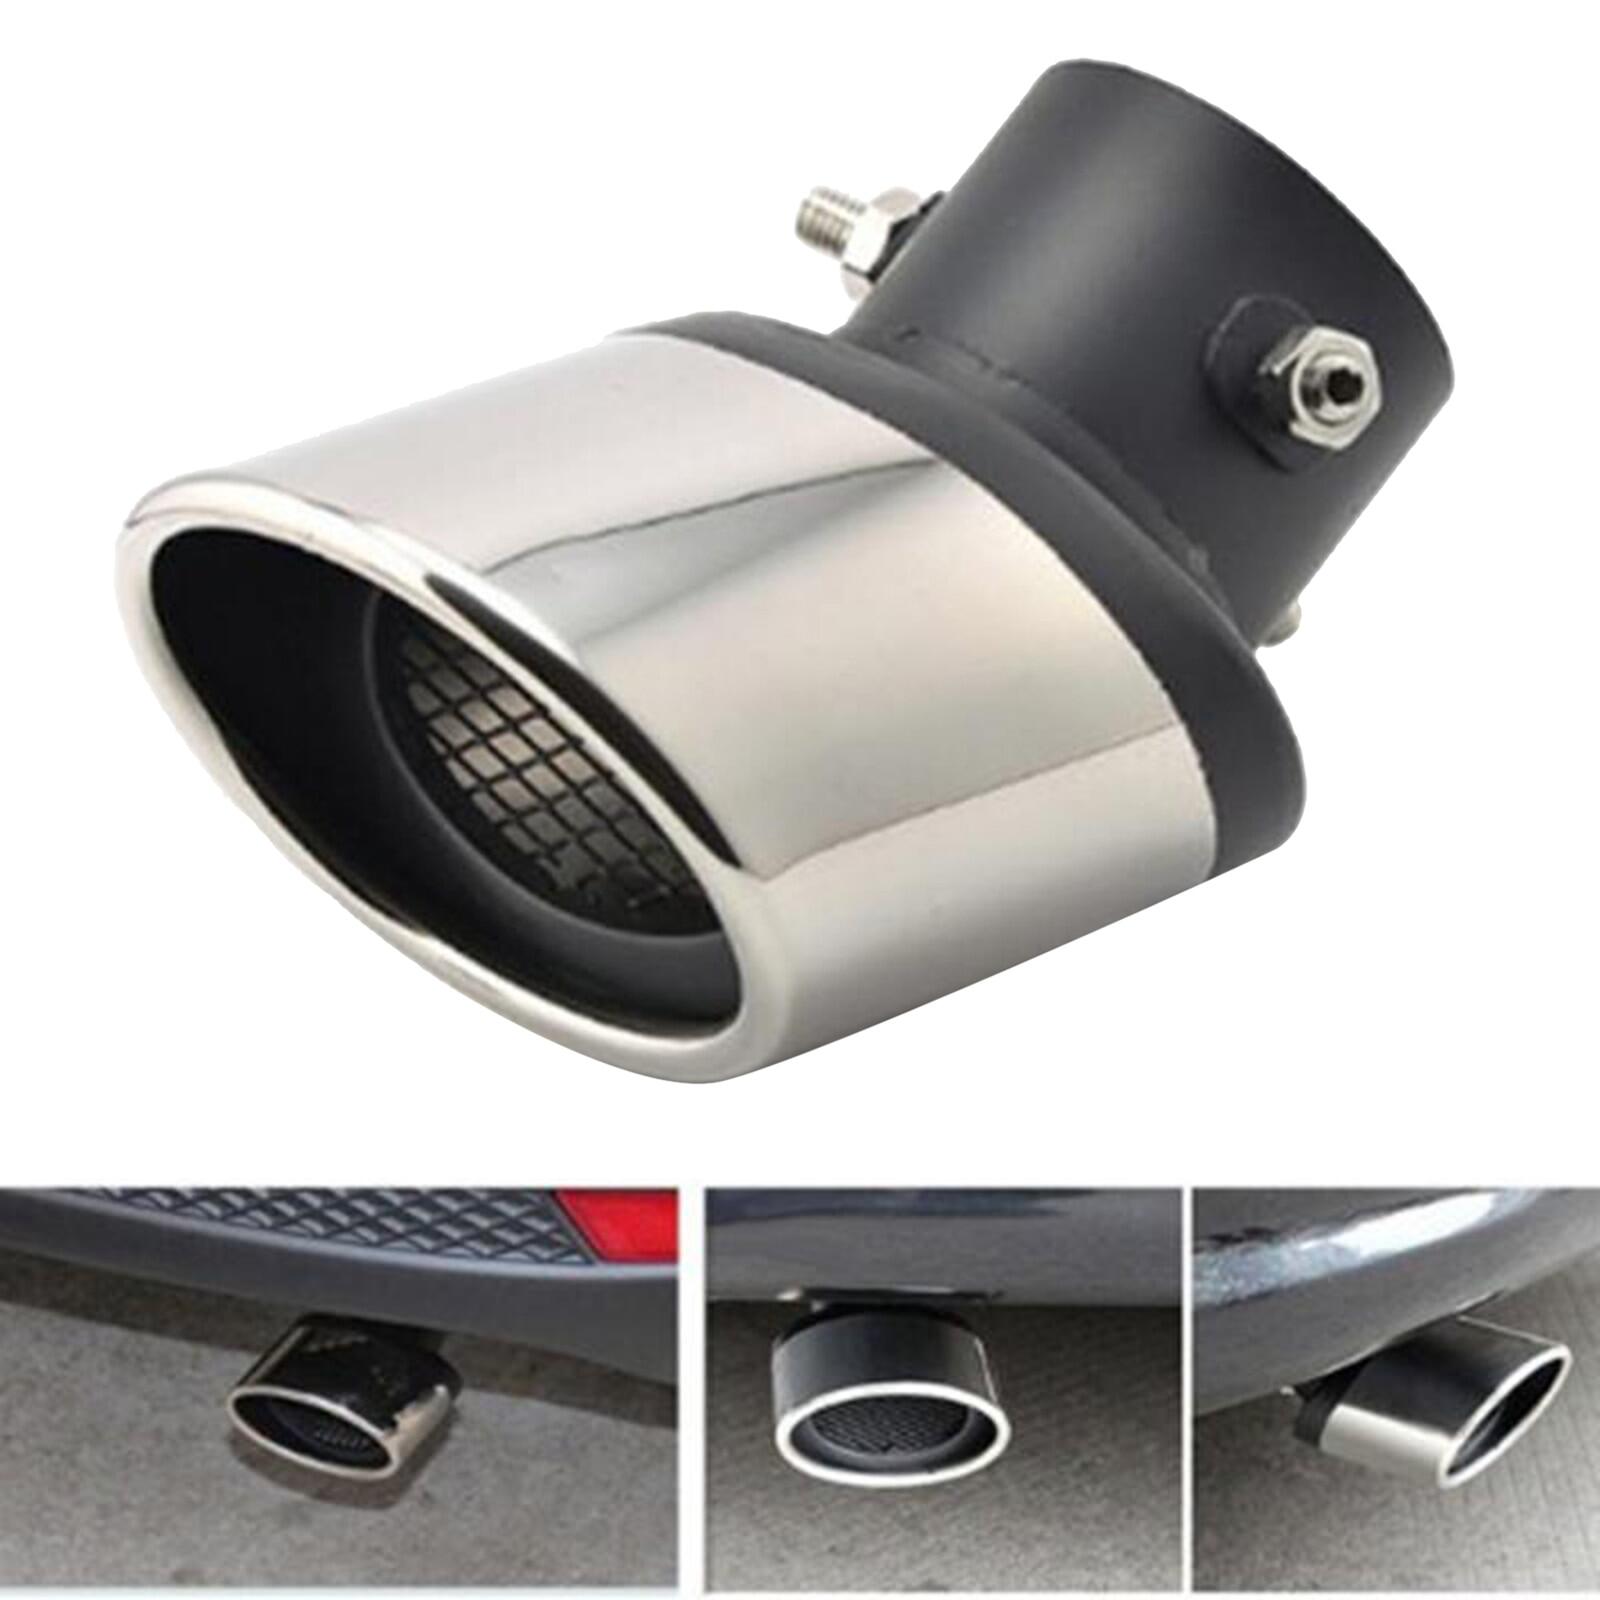 Stainless Steel Car Exhaust Tail Pipe Muffler End Tip for Mazda 5 6